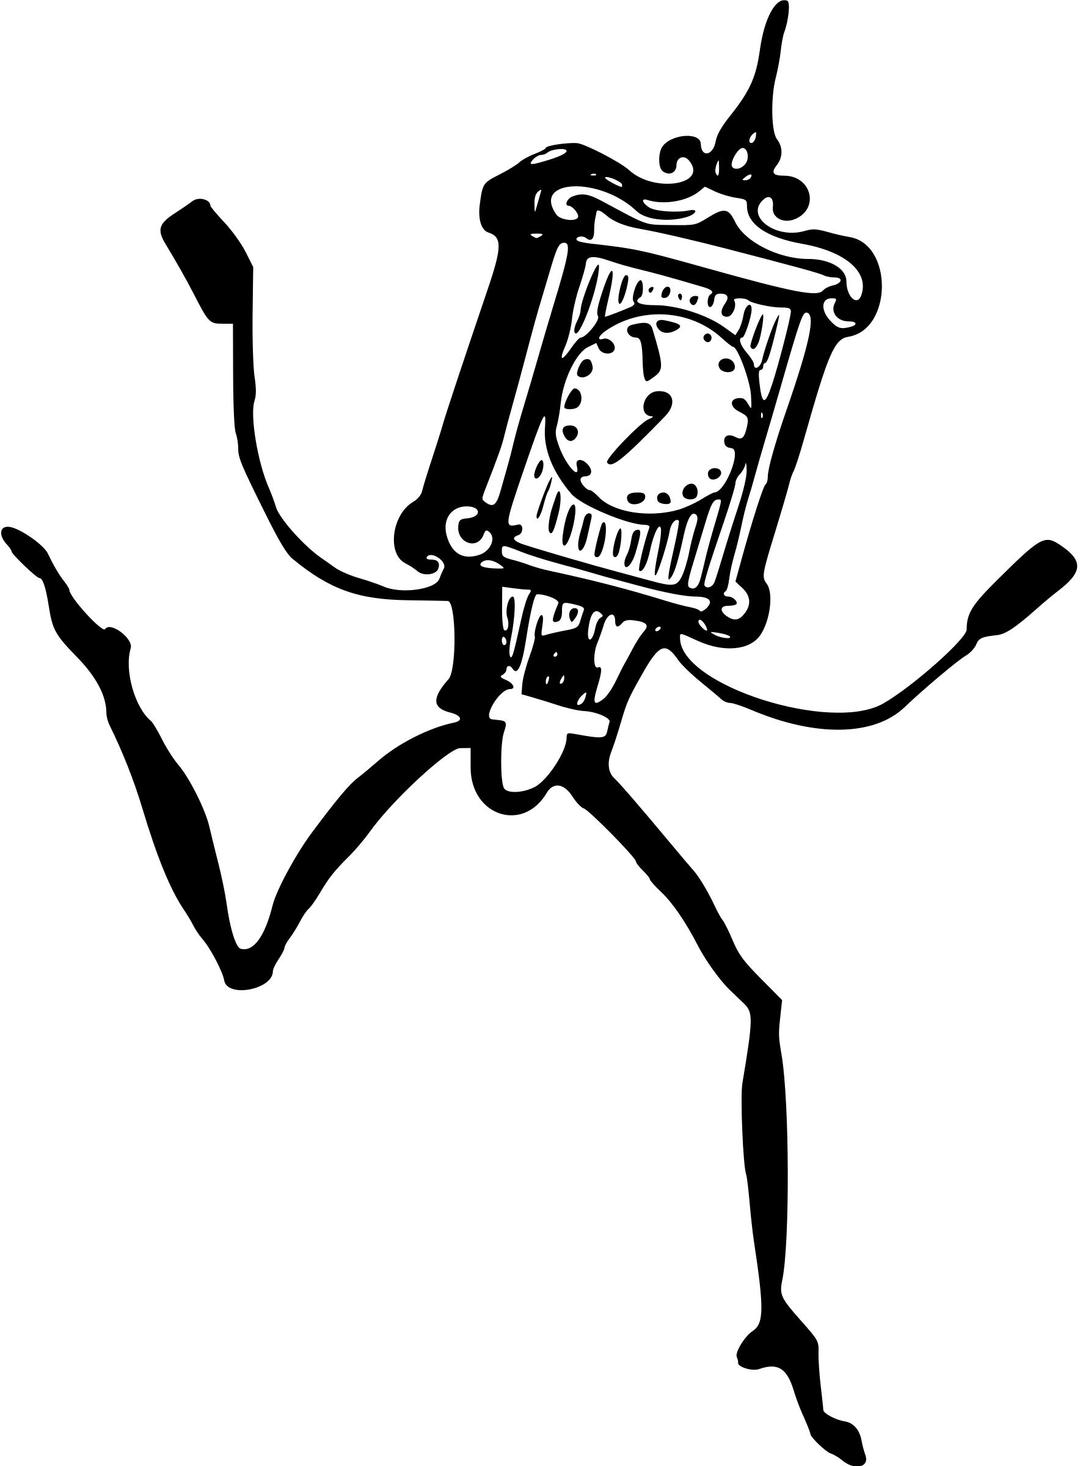 Freaky animated clock png transparent